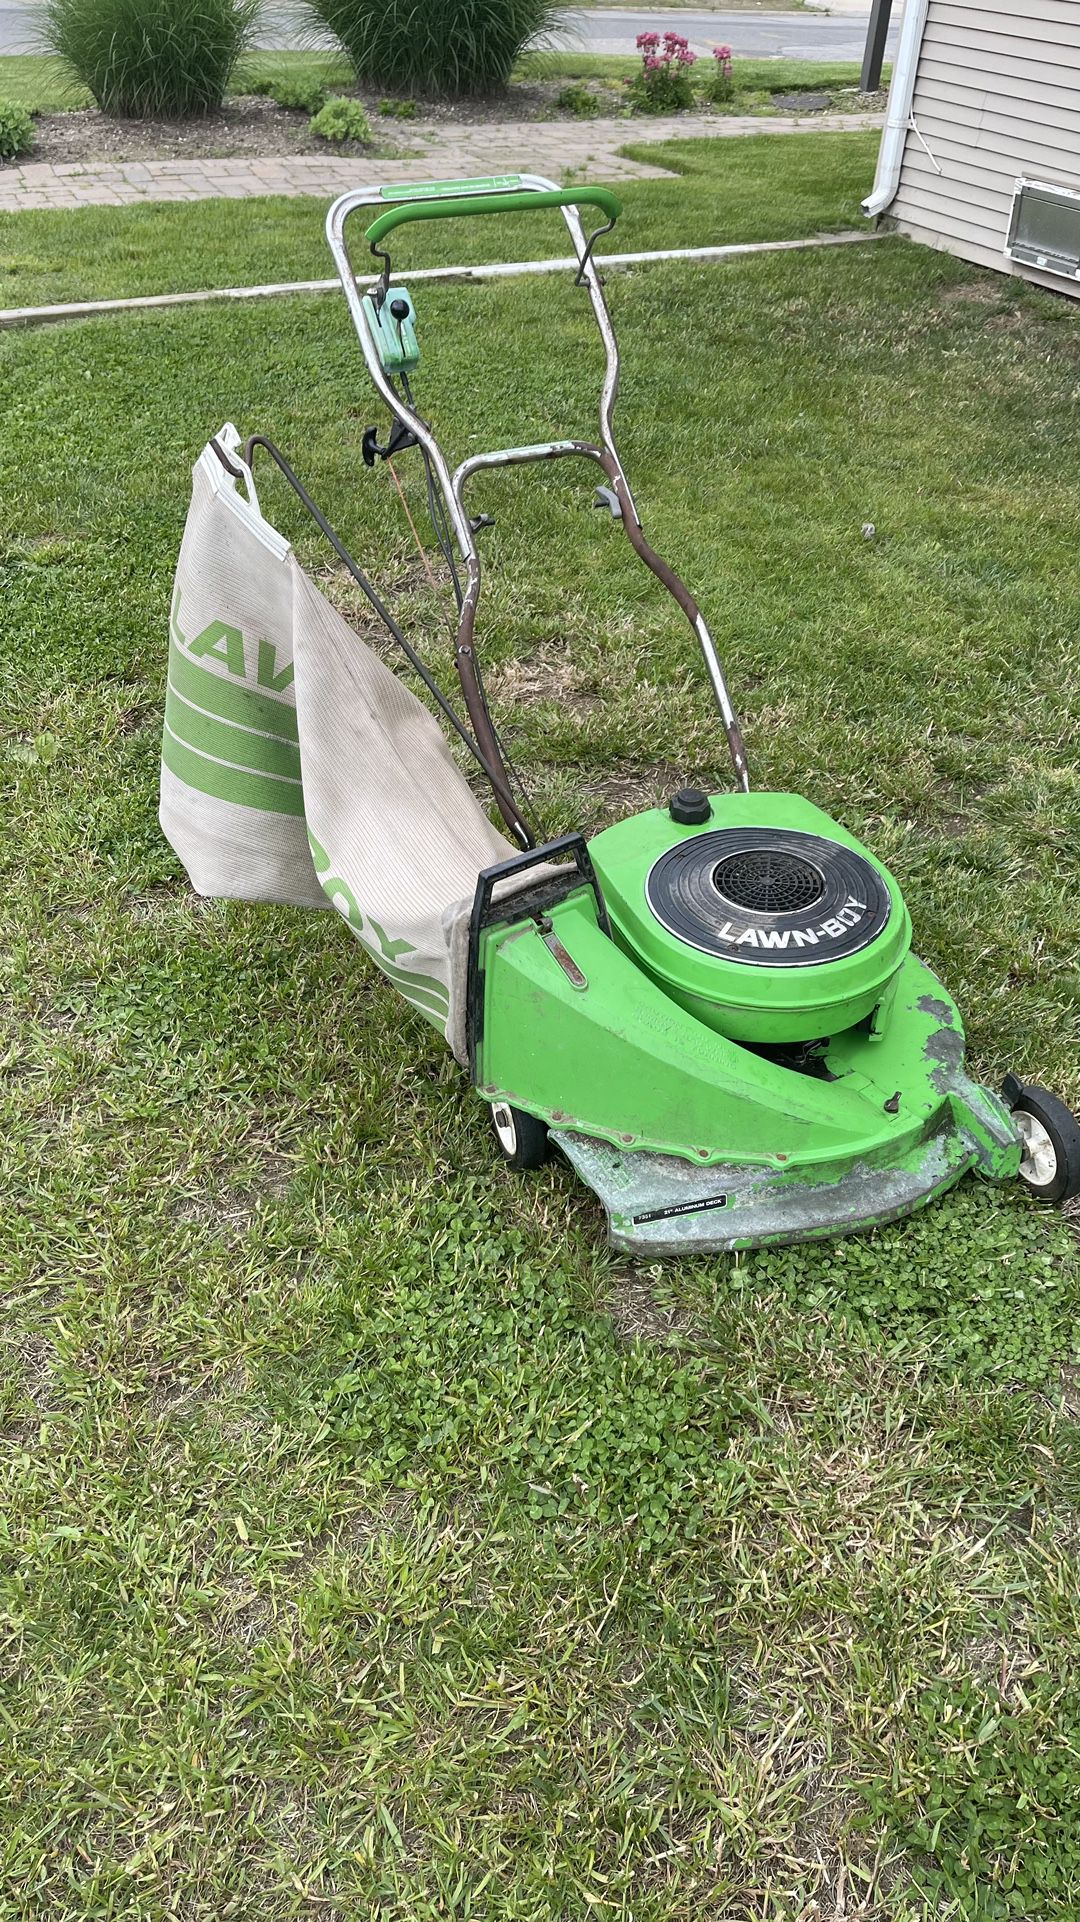 Vintage Lawnboy 2 Cycle Push Mower PROJECT